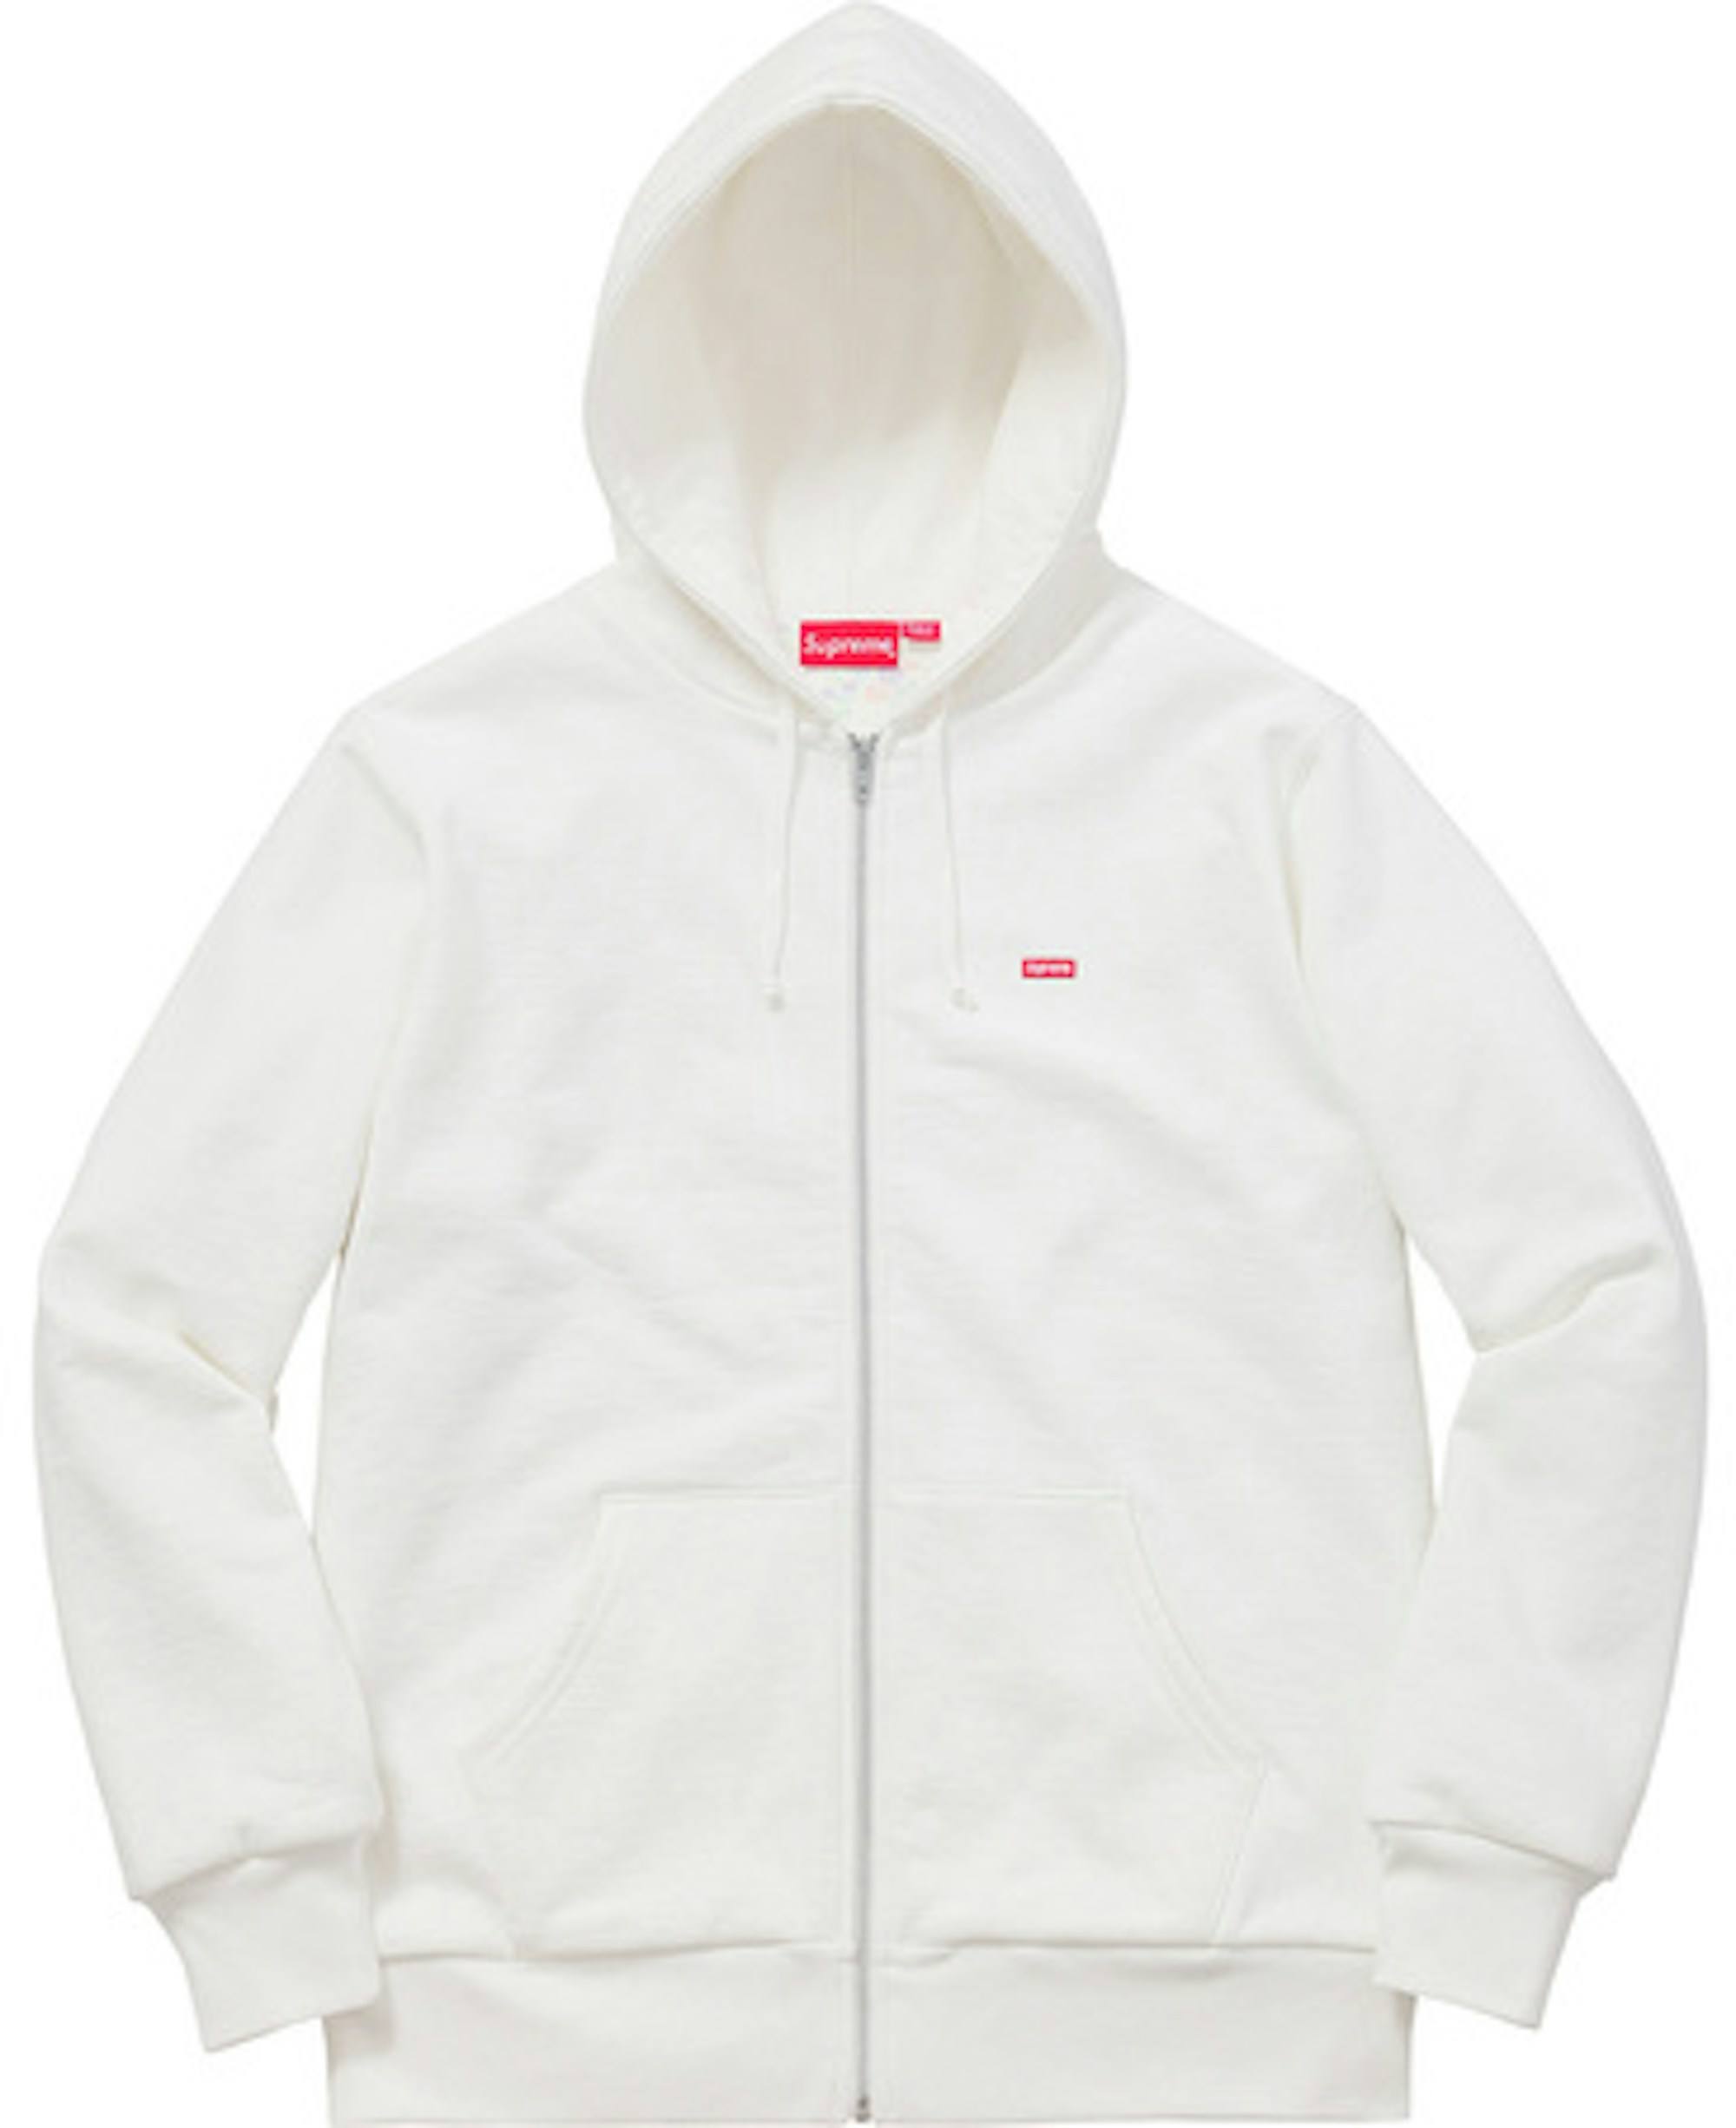 Supreme Small Box Thermal Zip Up Hoodie White - FW16